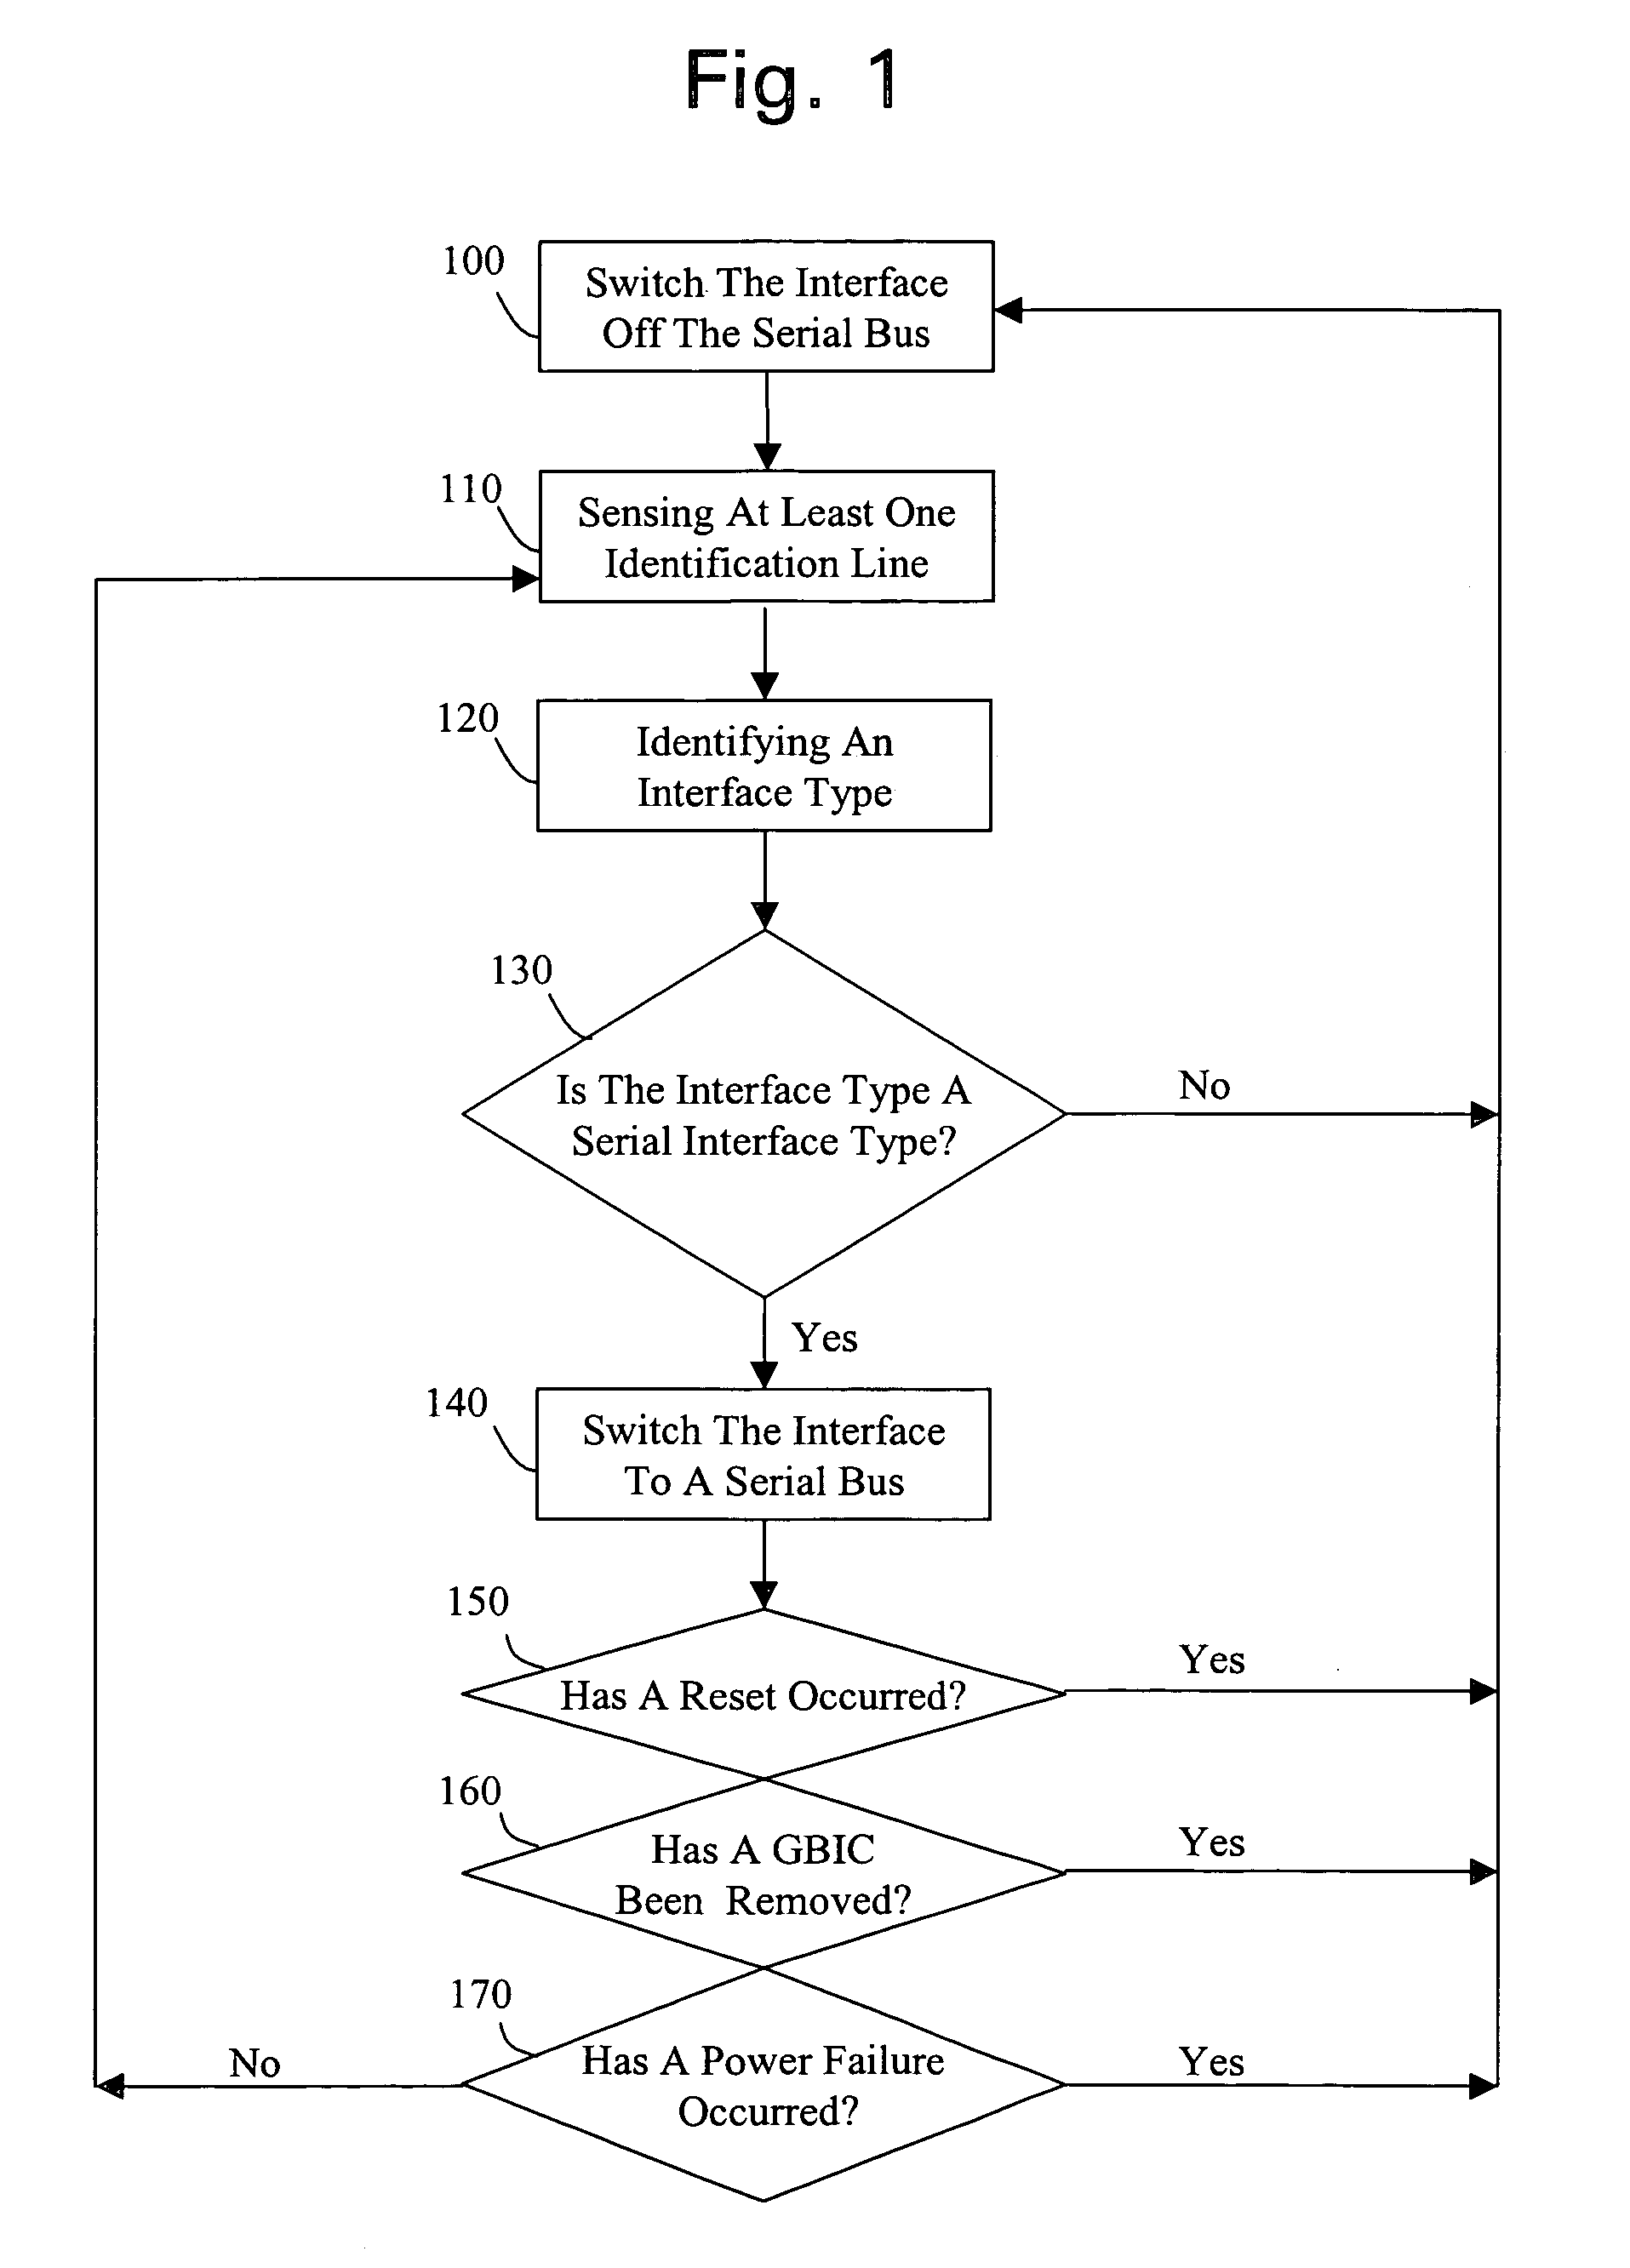 Method for connecting gigabit interface converters with serial identification capability into an active two-wire serial bus